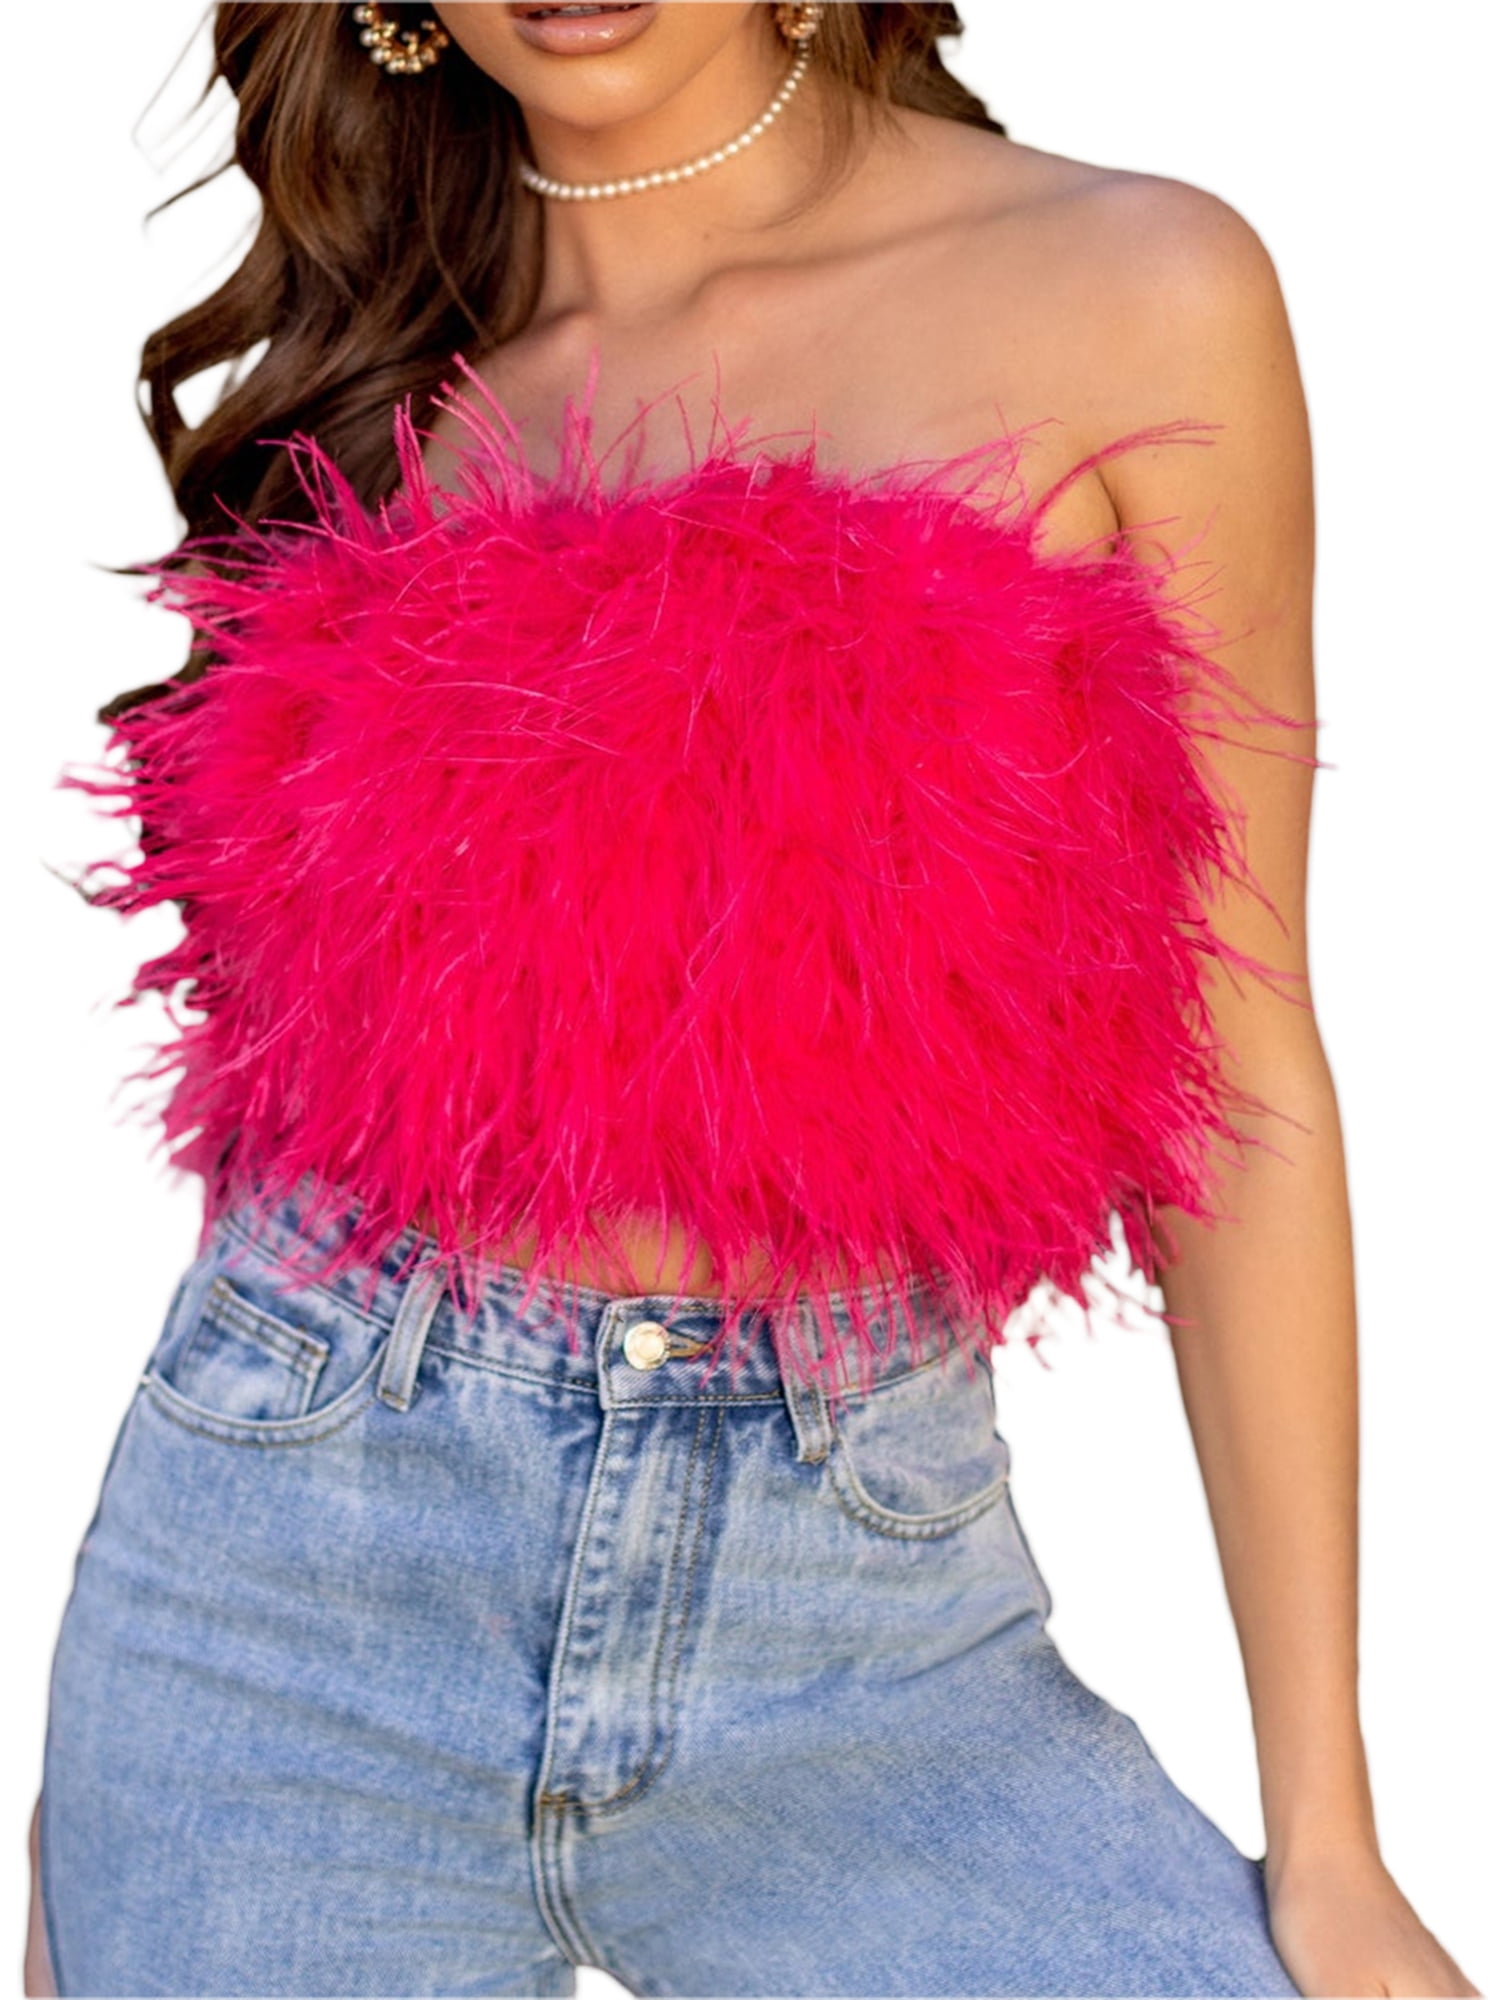 Women Faux Fur Crop Top Strapless Bandeau Tube Top Feather Aesthetic ...